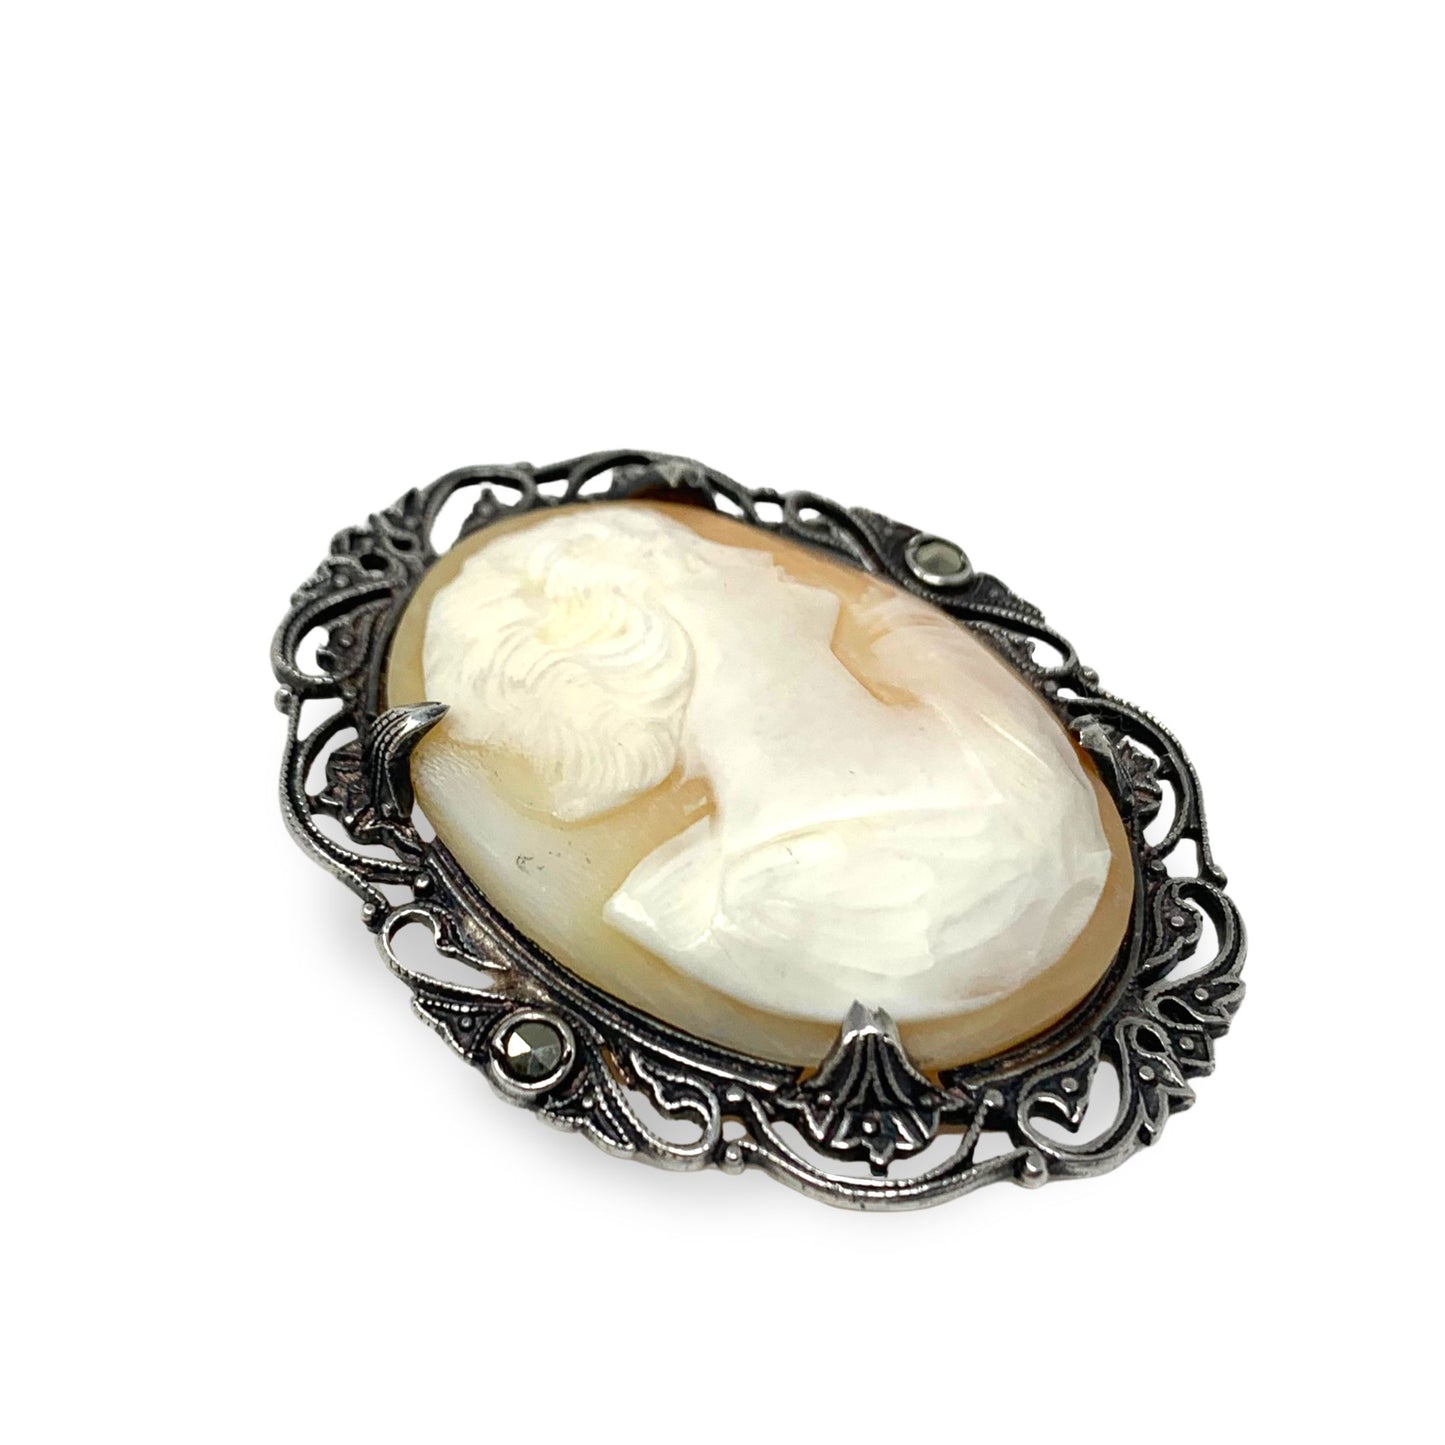 Sterling Silver Art Deco Shell Cameo Brooch